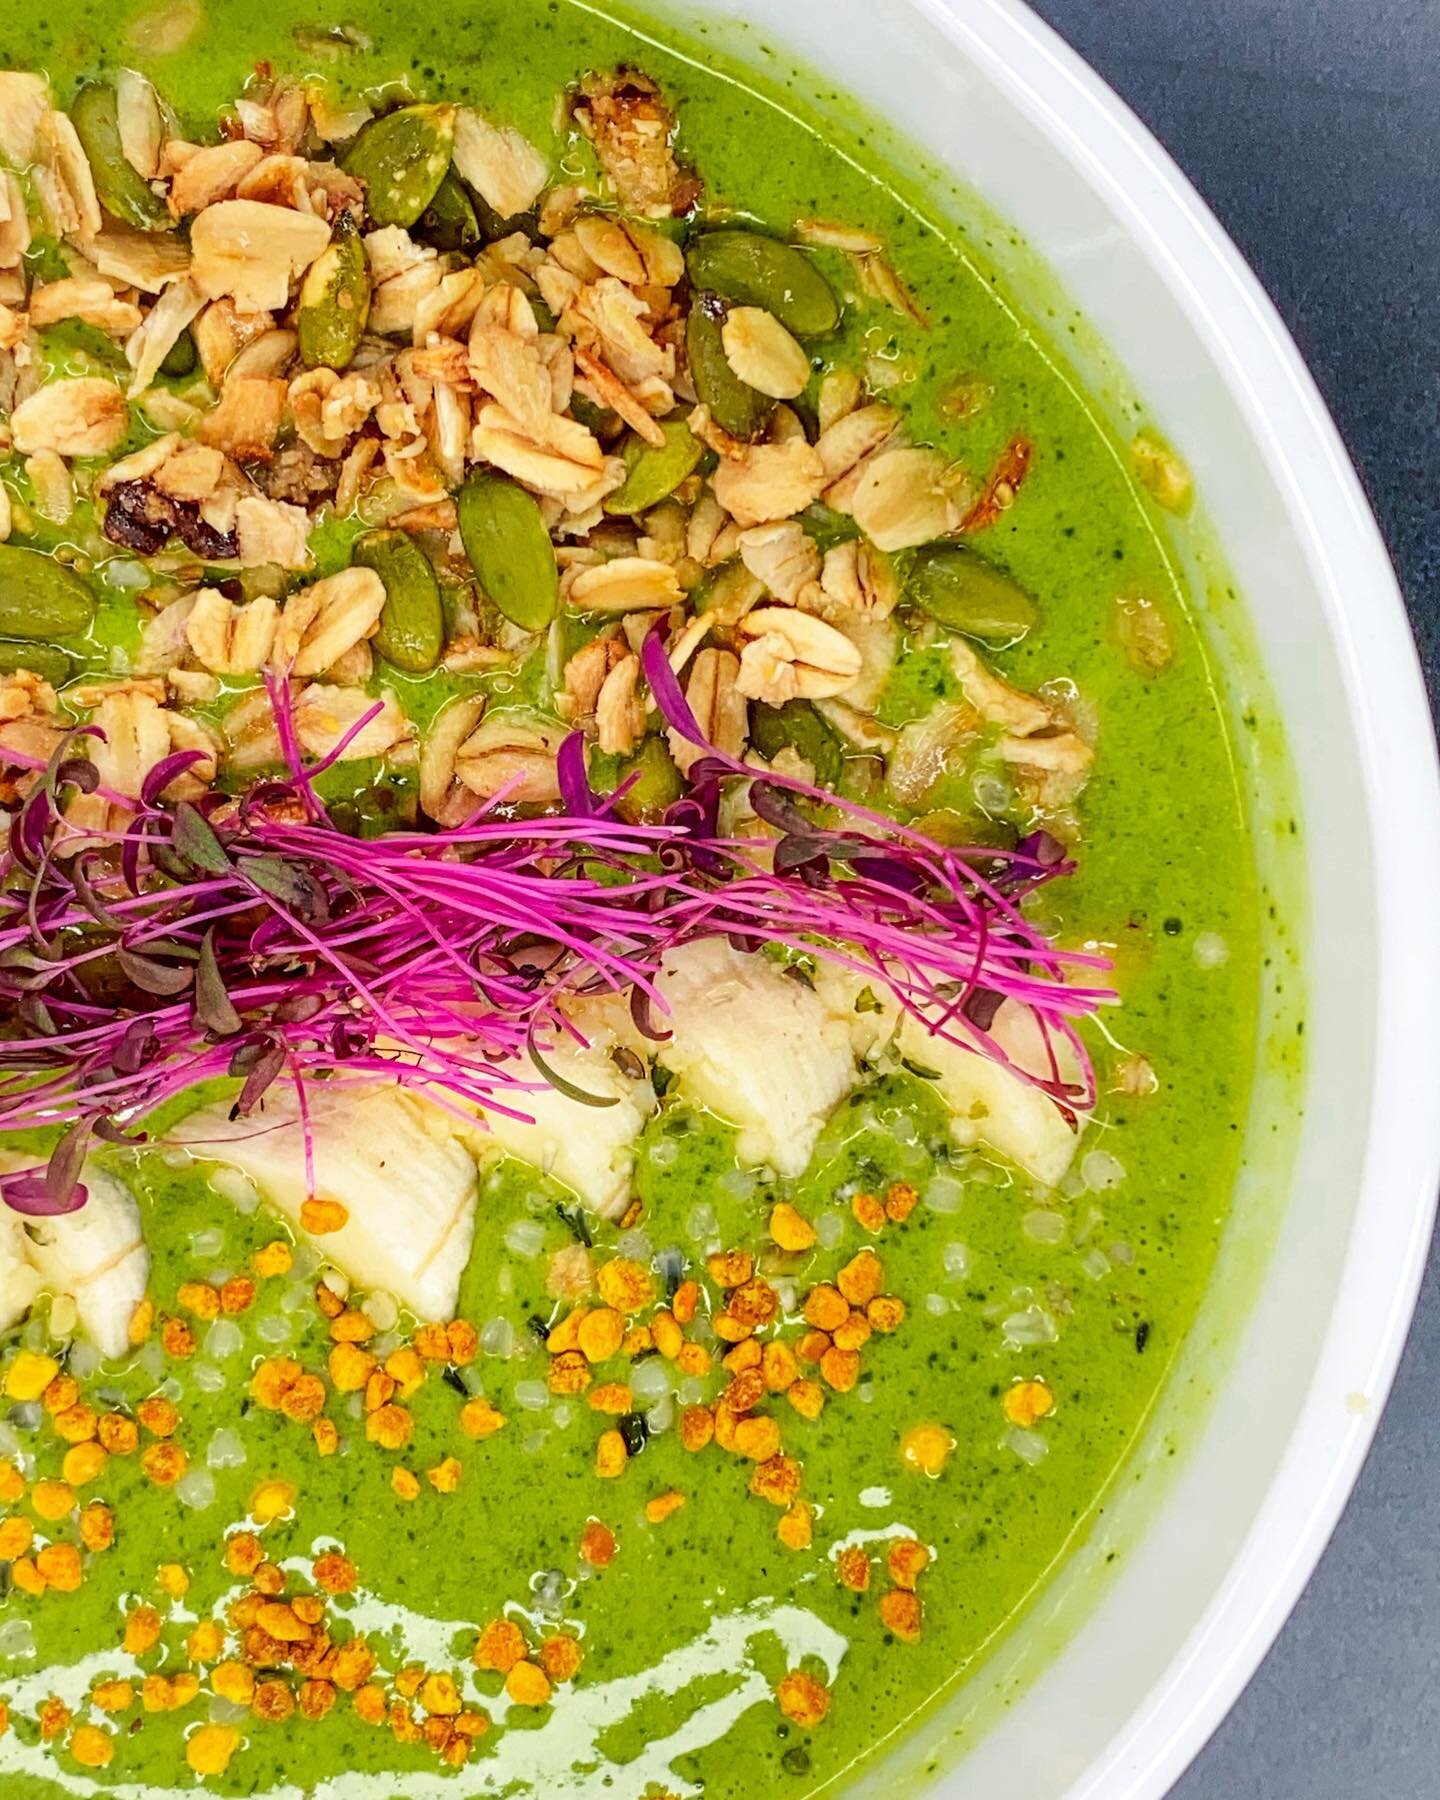 Not sure what&rsquo;s better&hellip; the taste of this bowl or how gorgeous it is! Recipe below ⇩⇩

Blend ➝ Frozen banana, spinach, matcha, milk of choice, @lairdsuperfood mushroom powder

Top ➝ @blue_ridge_granola granola, banana, bee pollen, hemp s